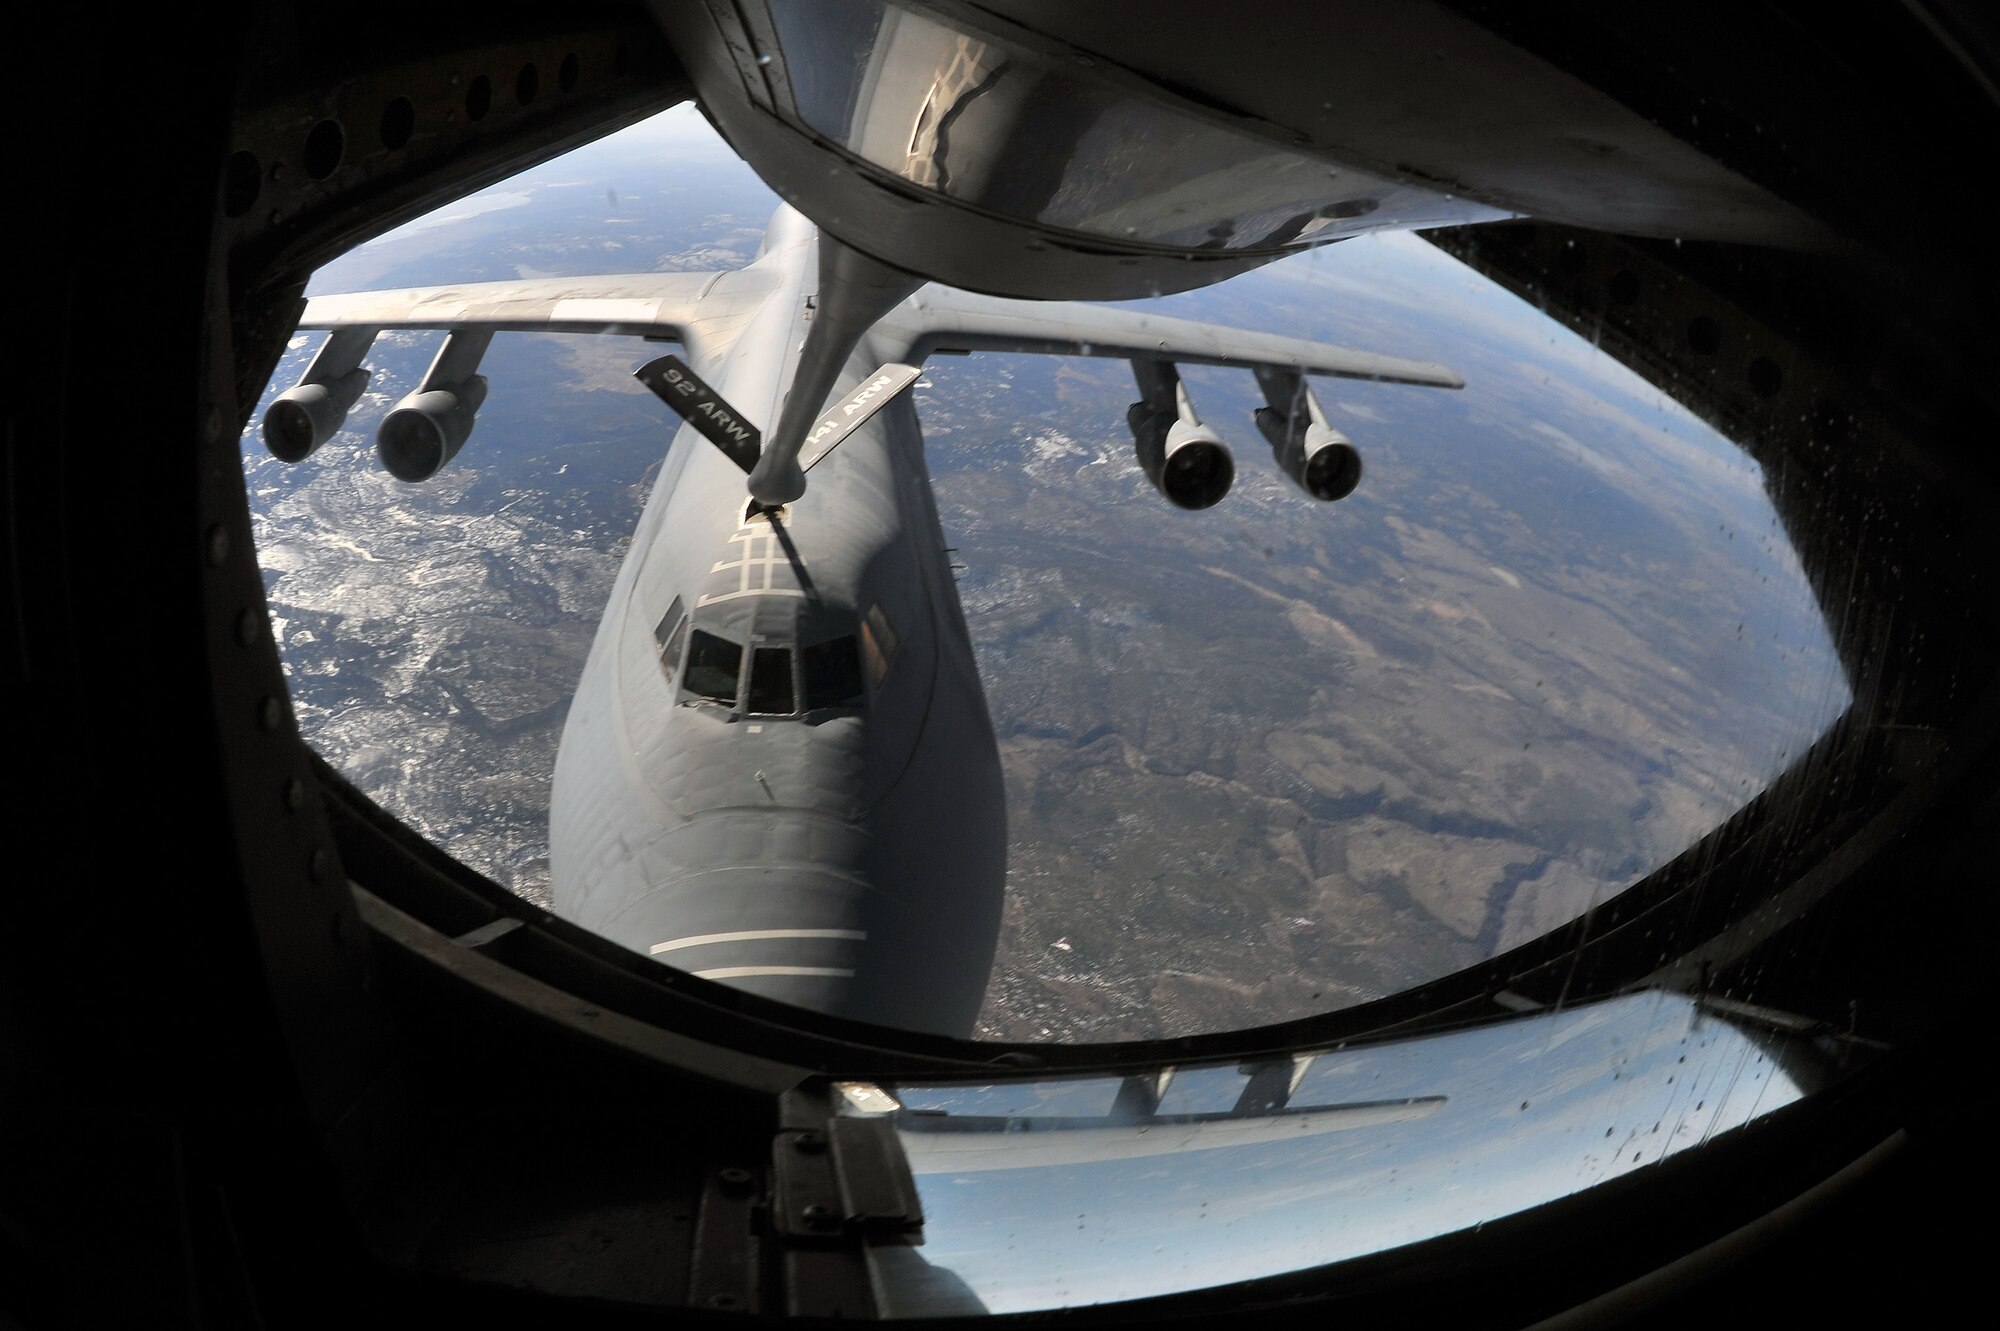 A KC-135 Stratotanker from Fairchild AFB, Wash., refuels a C-5 Galaxy from Travis Air Force Base, Calif., during a refueling mission March 13, 2014. The flight was an all-female mission held to honor and commemorate Women’s History Month. (U.S. Air Force photo by Staff Sgt. Veronica Montes/Released)